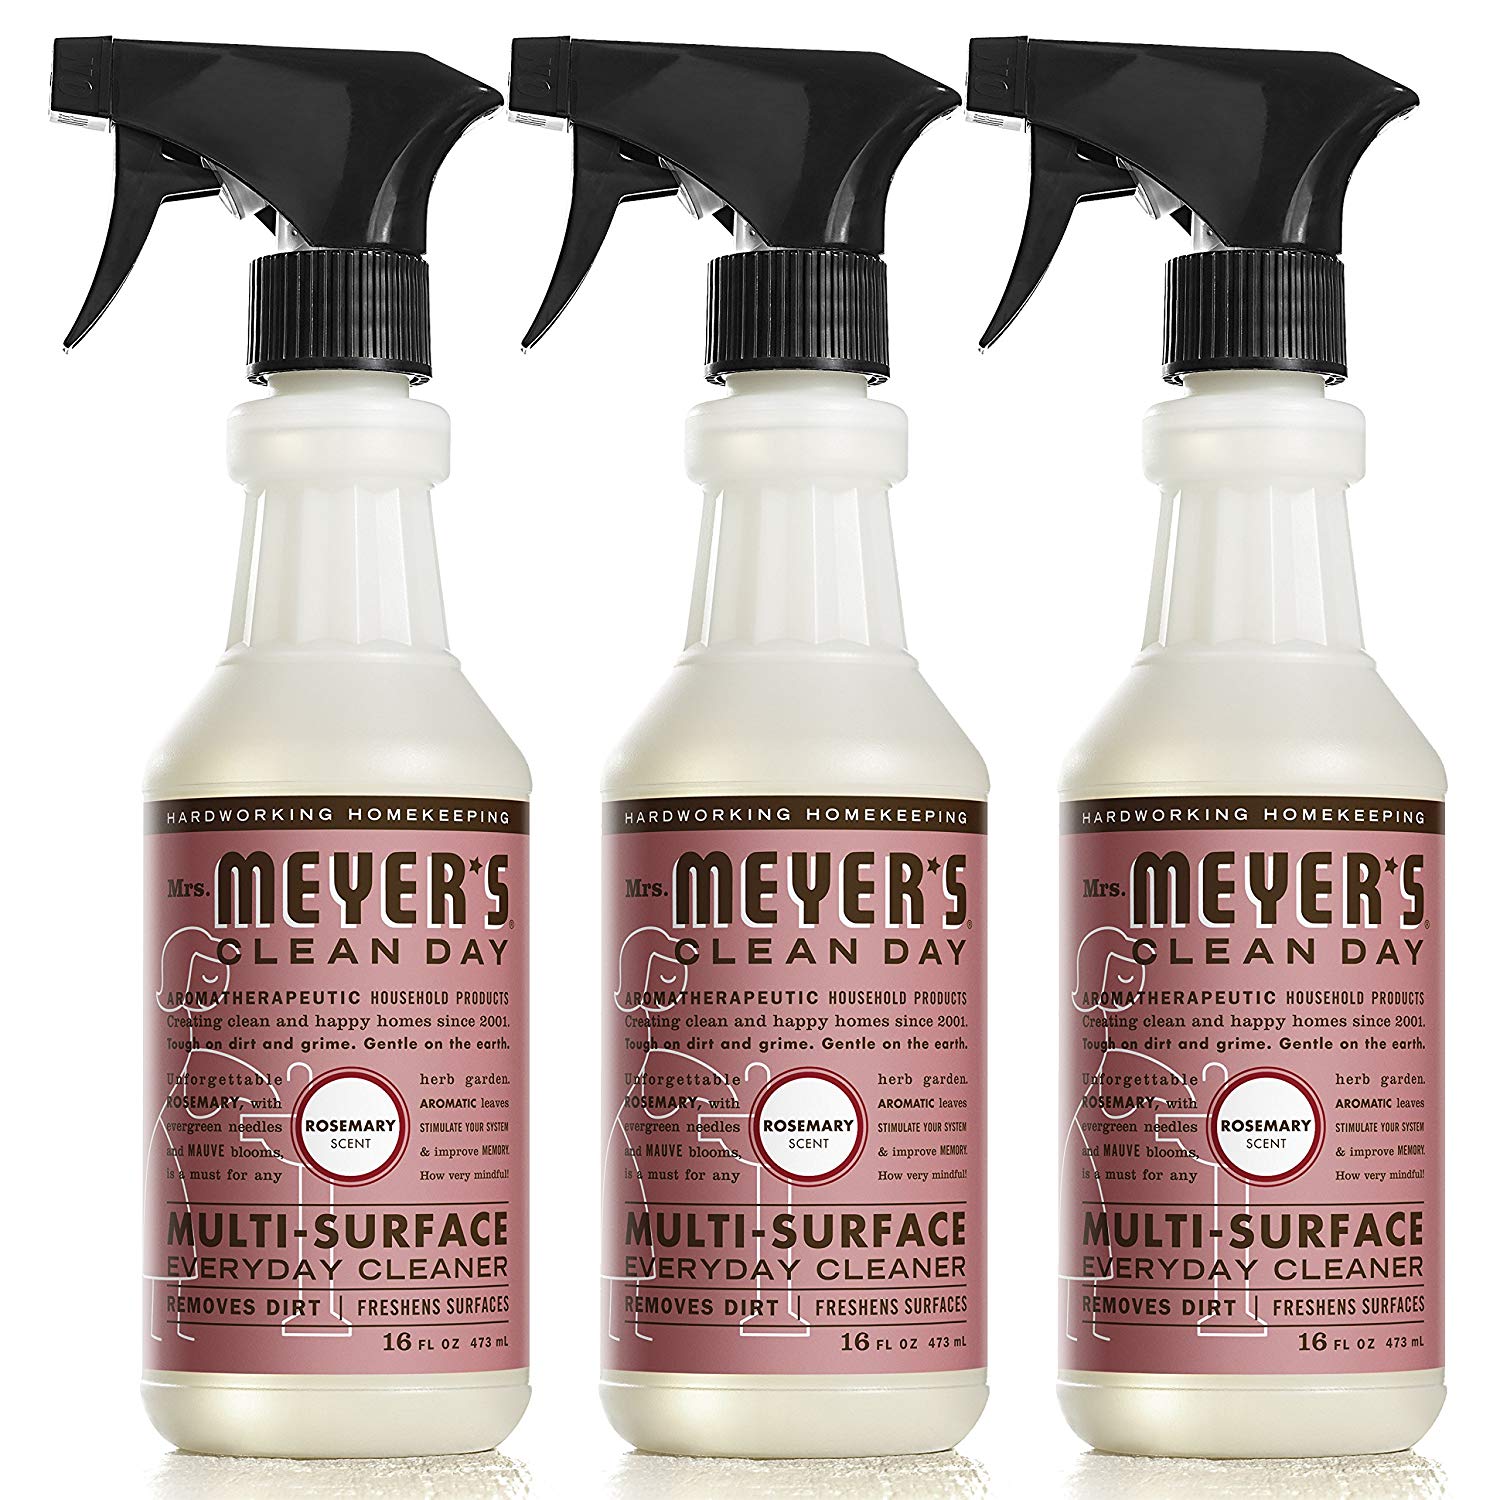 Mrs. Meyers Clean Day Multi-Surface Everyday Cleaner - Rosemary - 16 fl oz - 3 ct